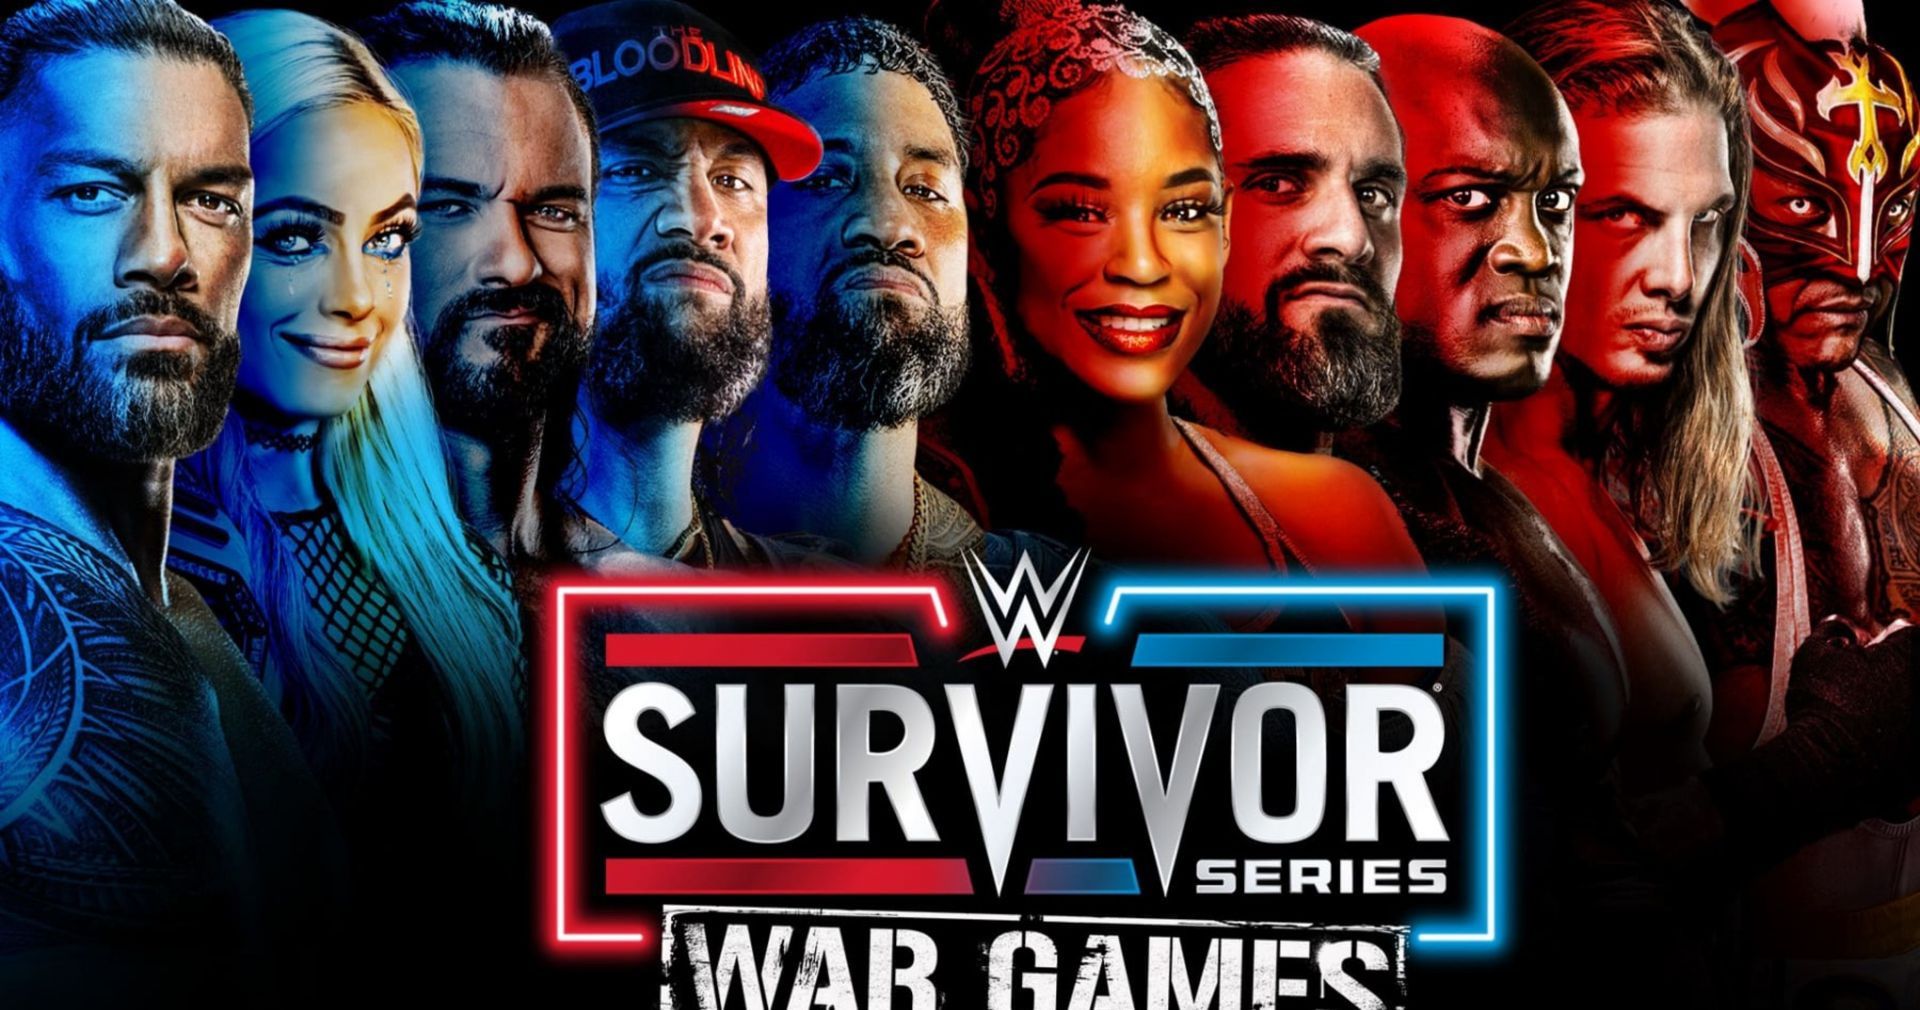 Survivor Series will feature two War Games matches this year